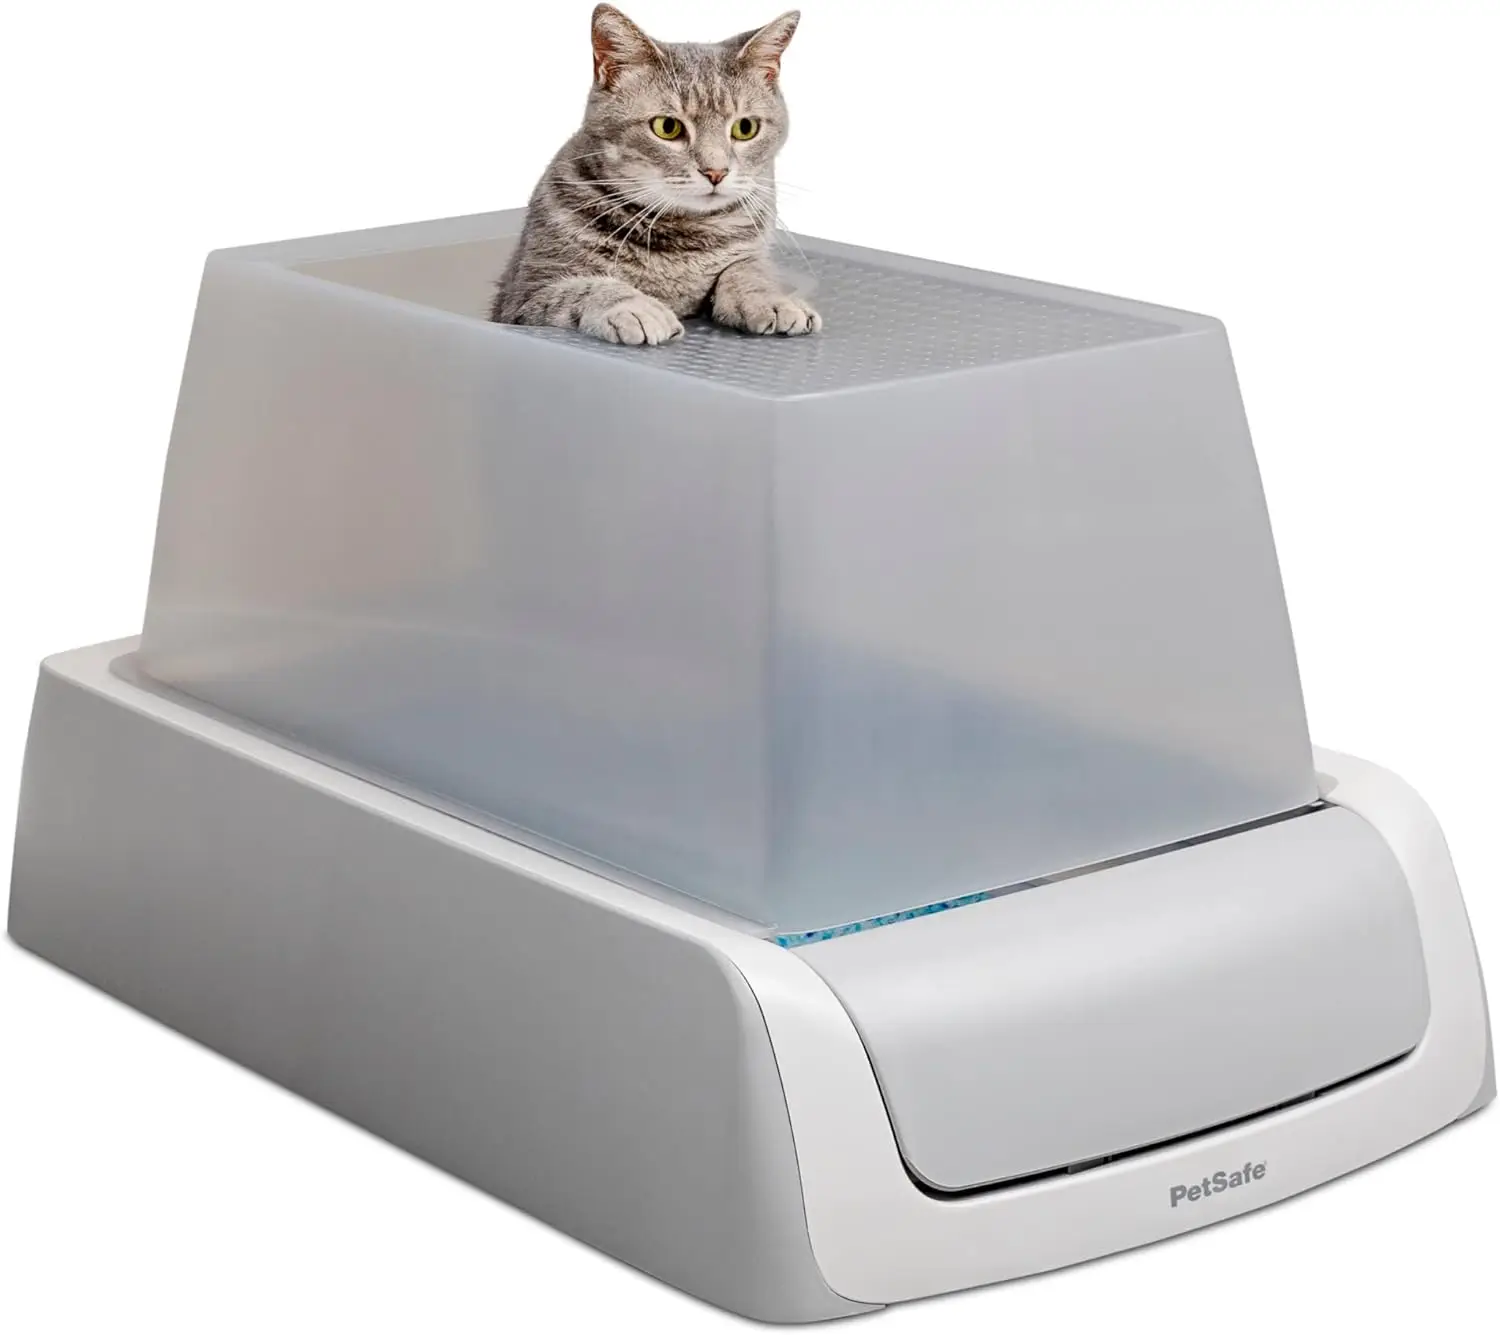 

PetSafe ScoopFree Crystal Pro Self-Cleaning Cat Litter Box - Never Scoop Litter Again - Hands-Free Cleanup with Disposable